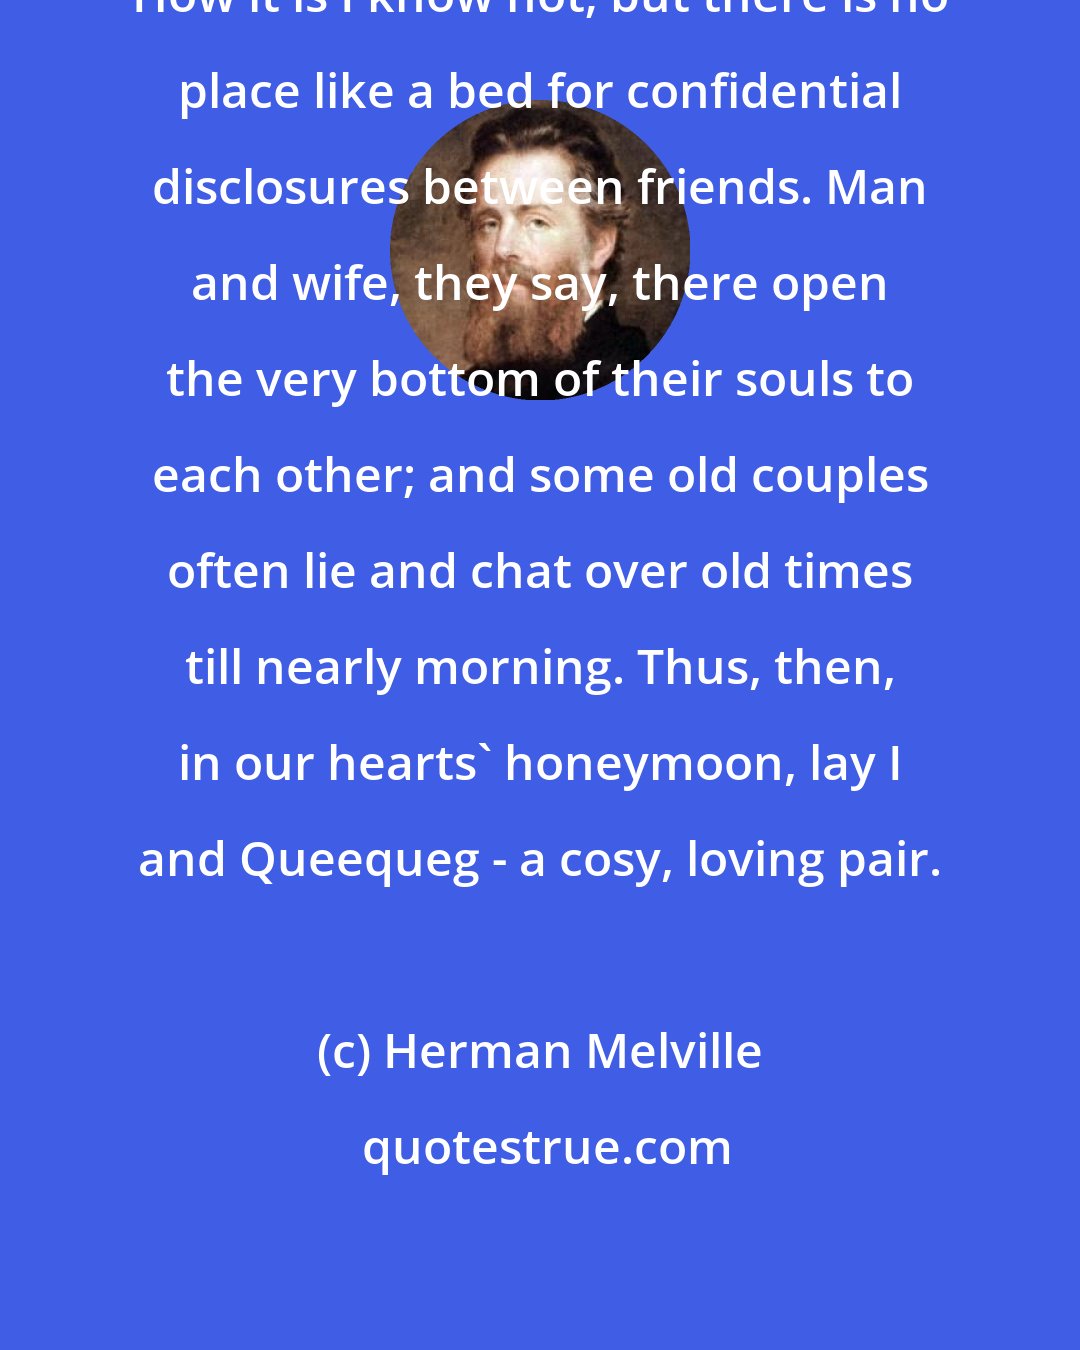 Herman Melville: How it is I know not; but there is no place like a bed for confidential disclosures between friends. Man and wife, they say, there open the very bottom of their souls to each other; and some old couples often lie and chat over old times till nearly morning. Thus, then, in our hearts' honeymoon, lay I and Queequeg - a cosy, loving pair.